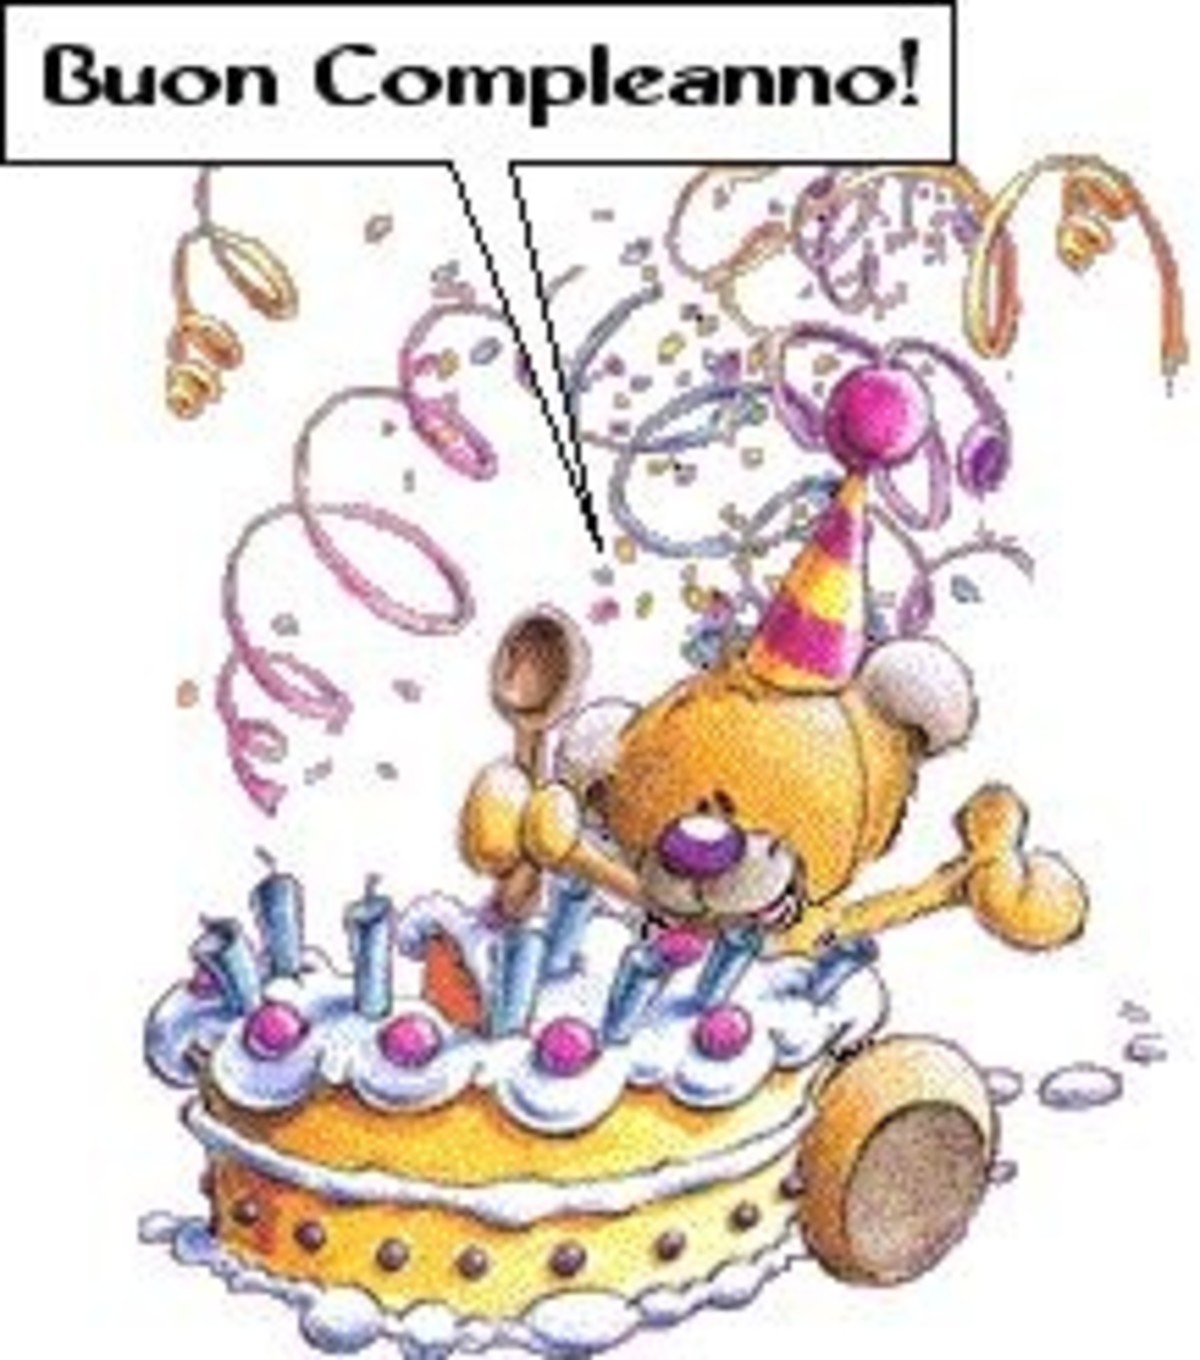 Dolce buon compleanno